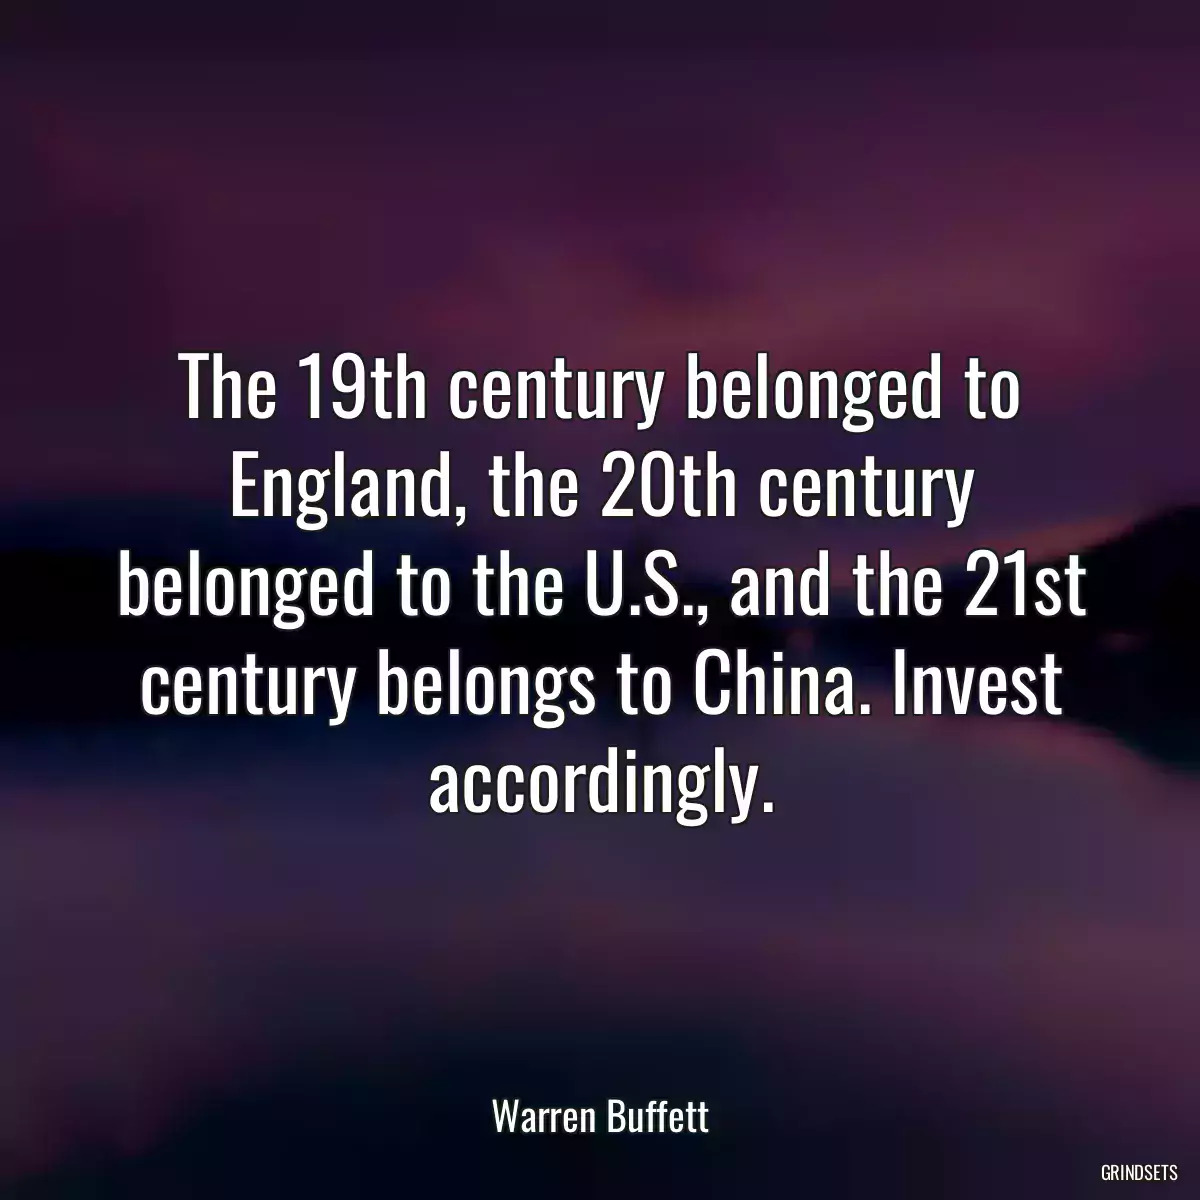 The 19th century belonged to England, the 20th century belonged to the U.S., and the 21st century belongs to China. Invest accordingly.